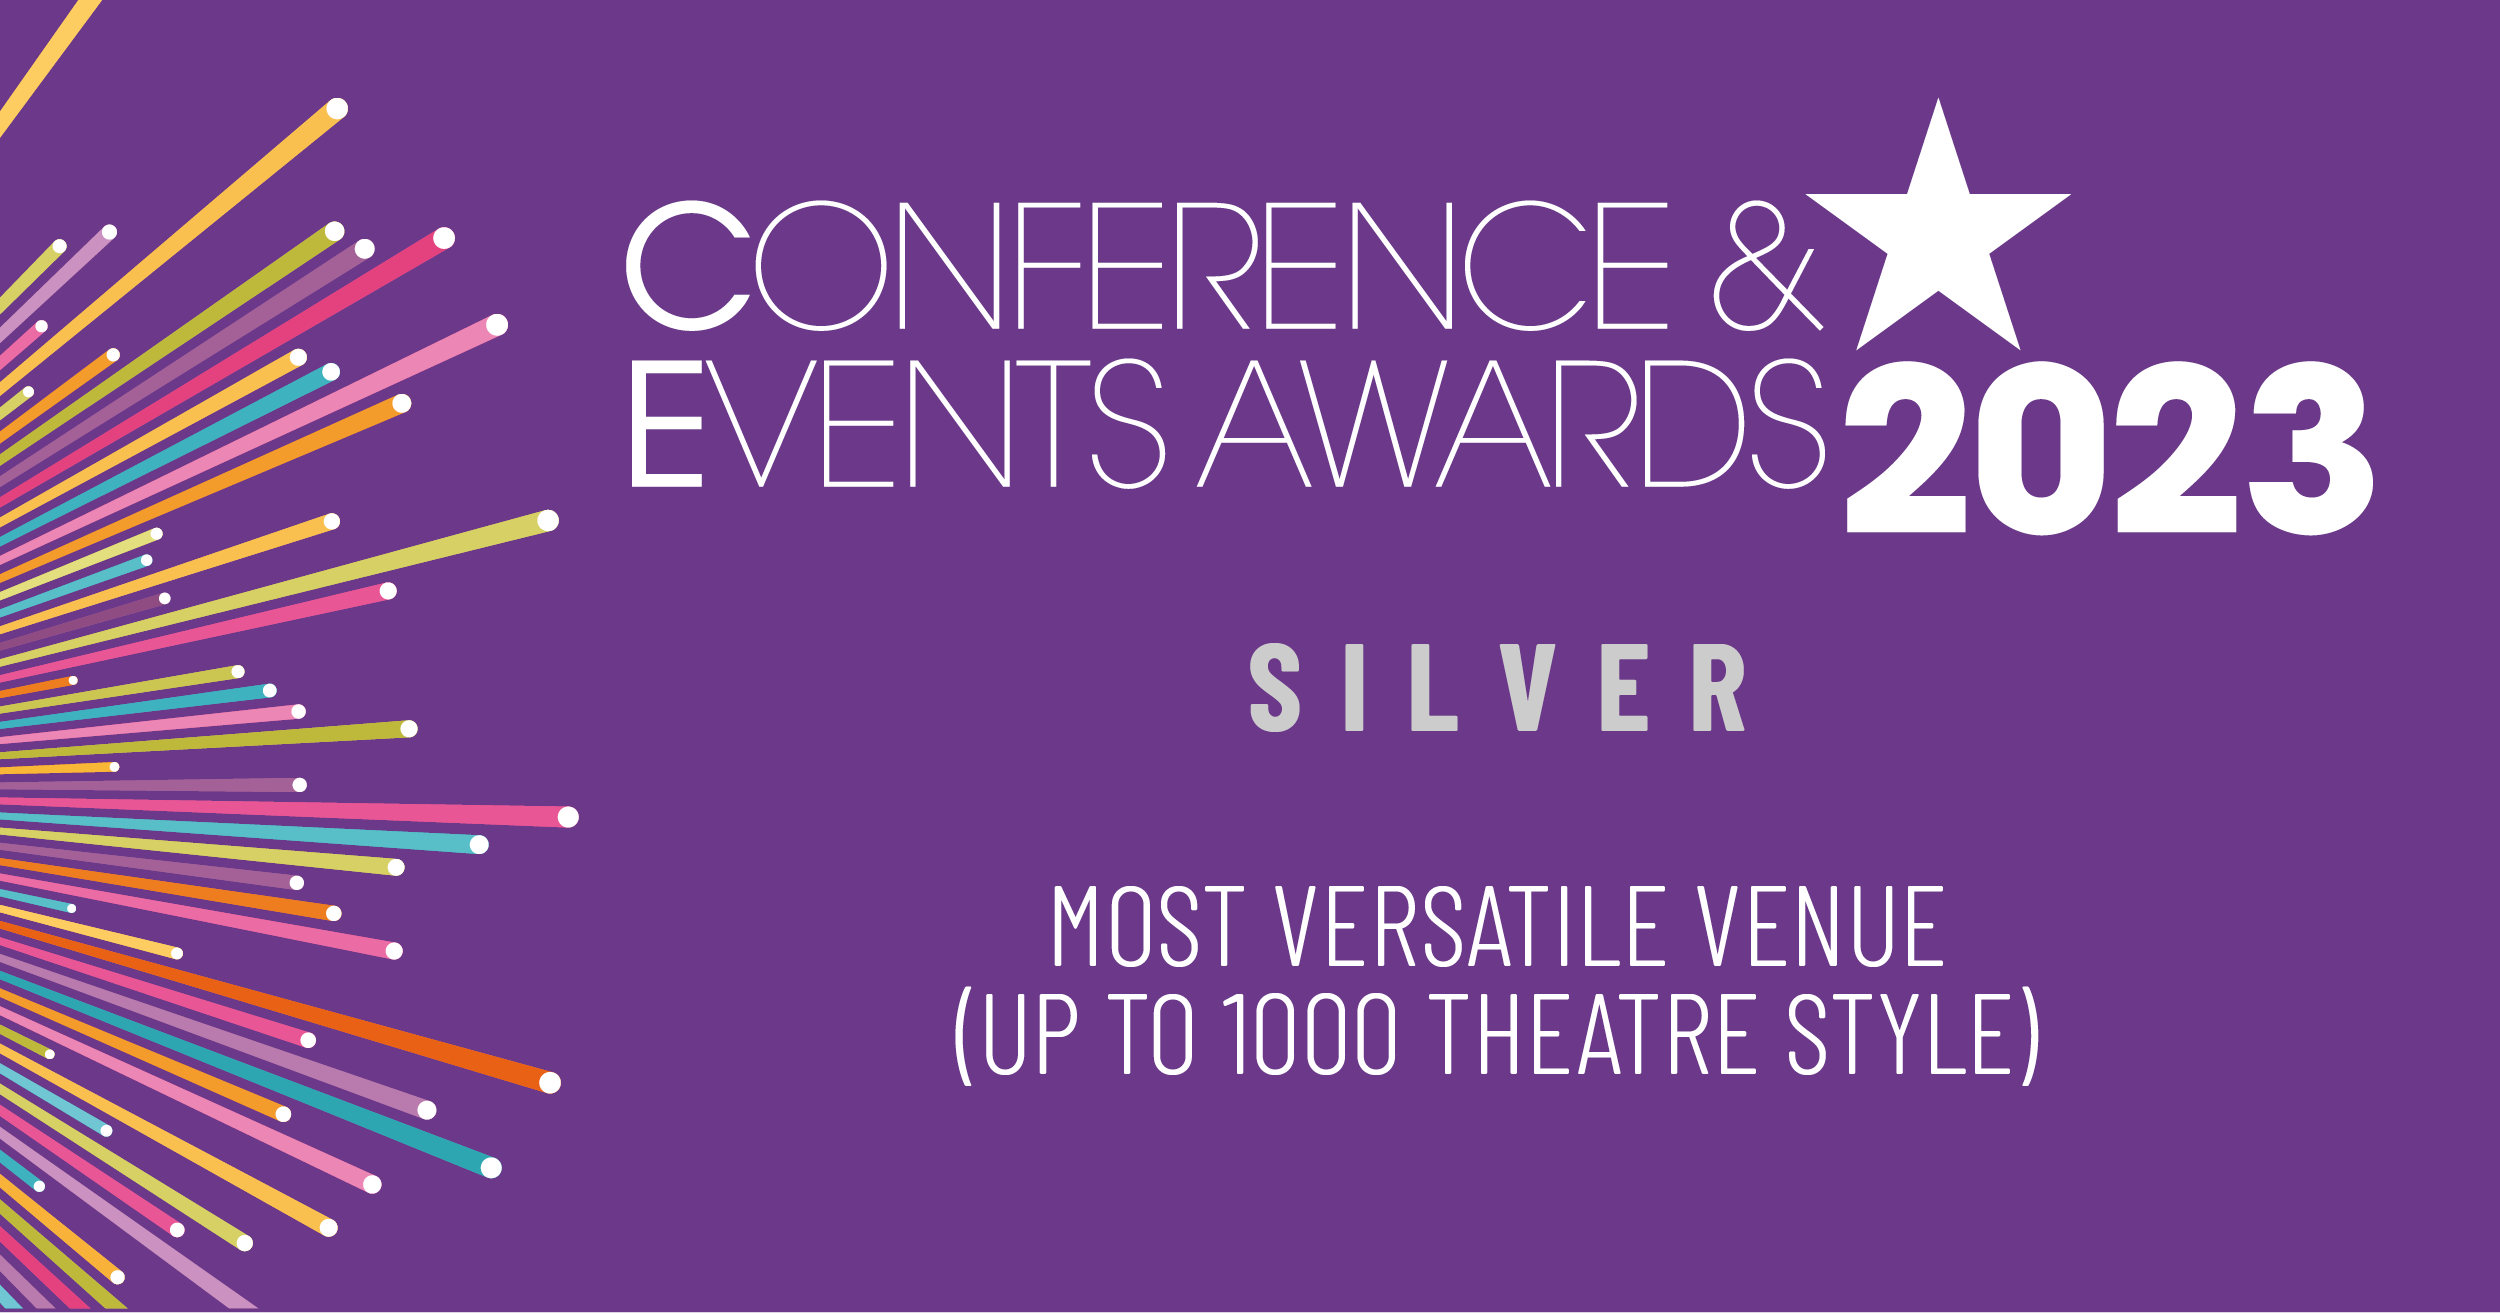 Conference & Events Awards 2023 – Silver – Most Versatile Venue (Up to 1000 Theatre Style)